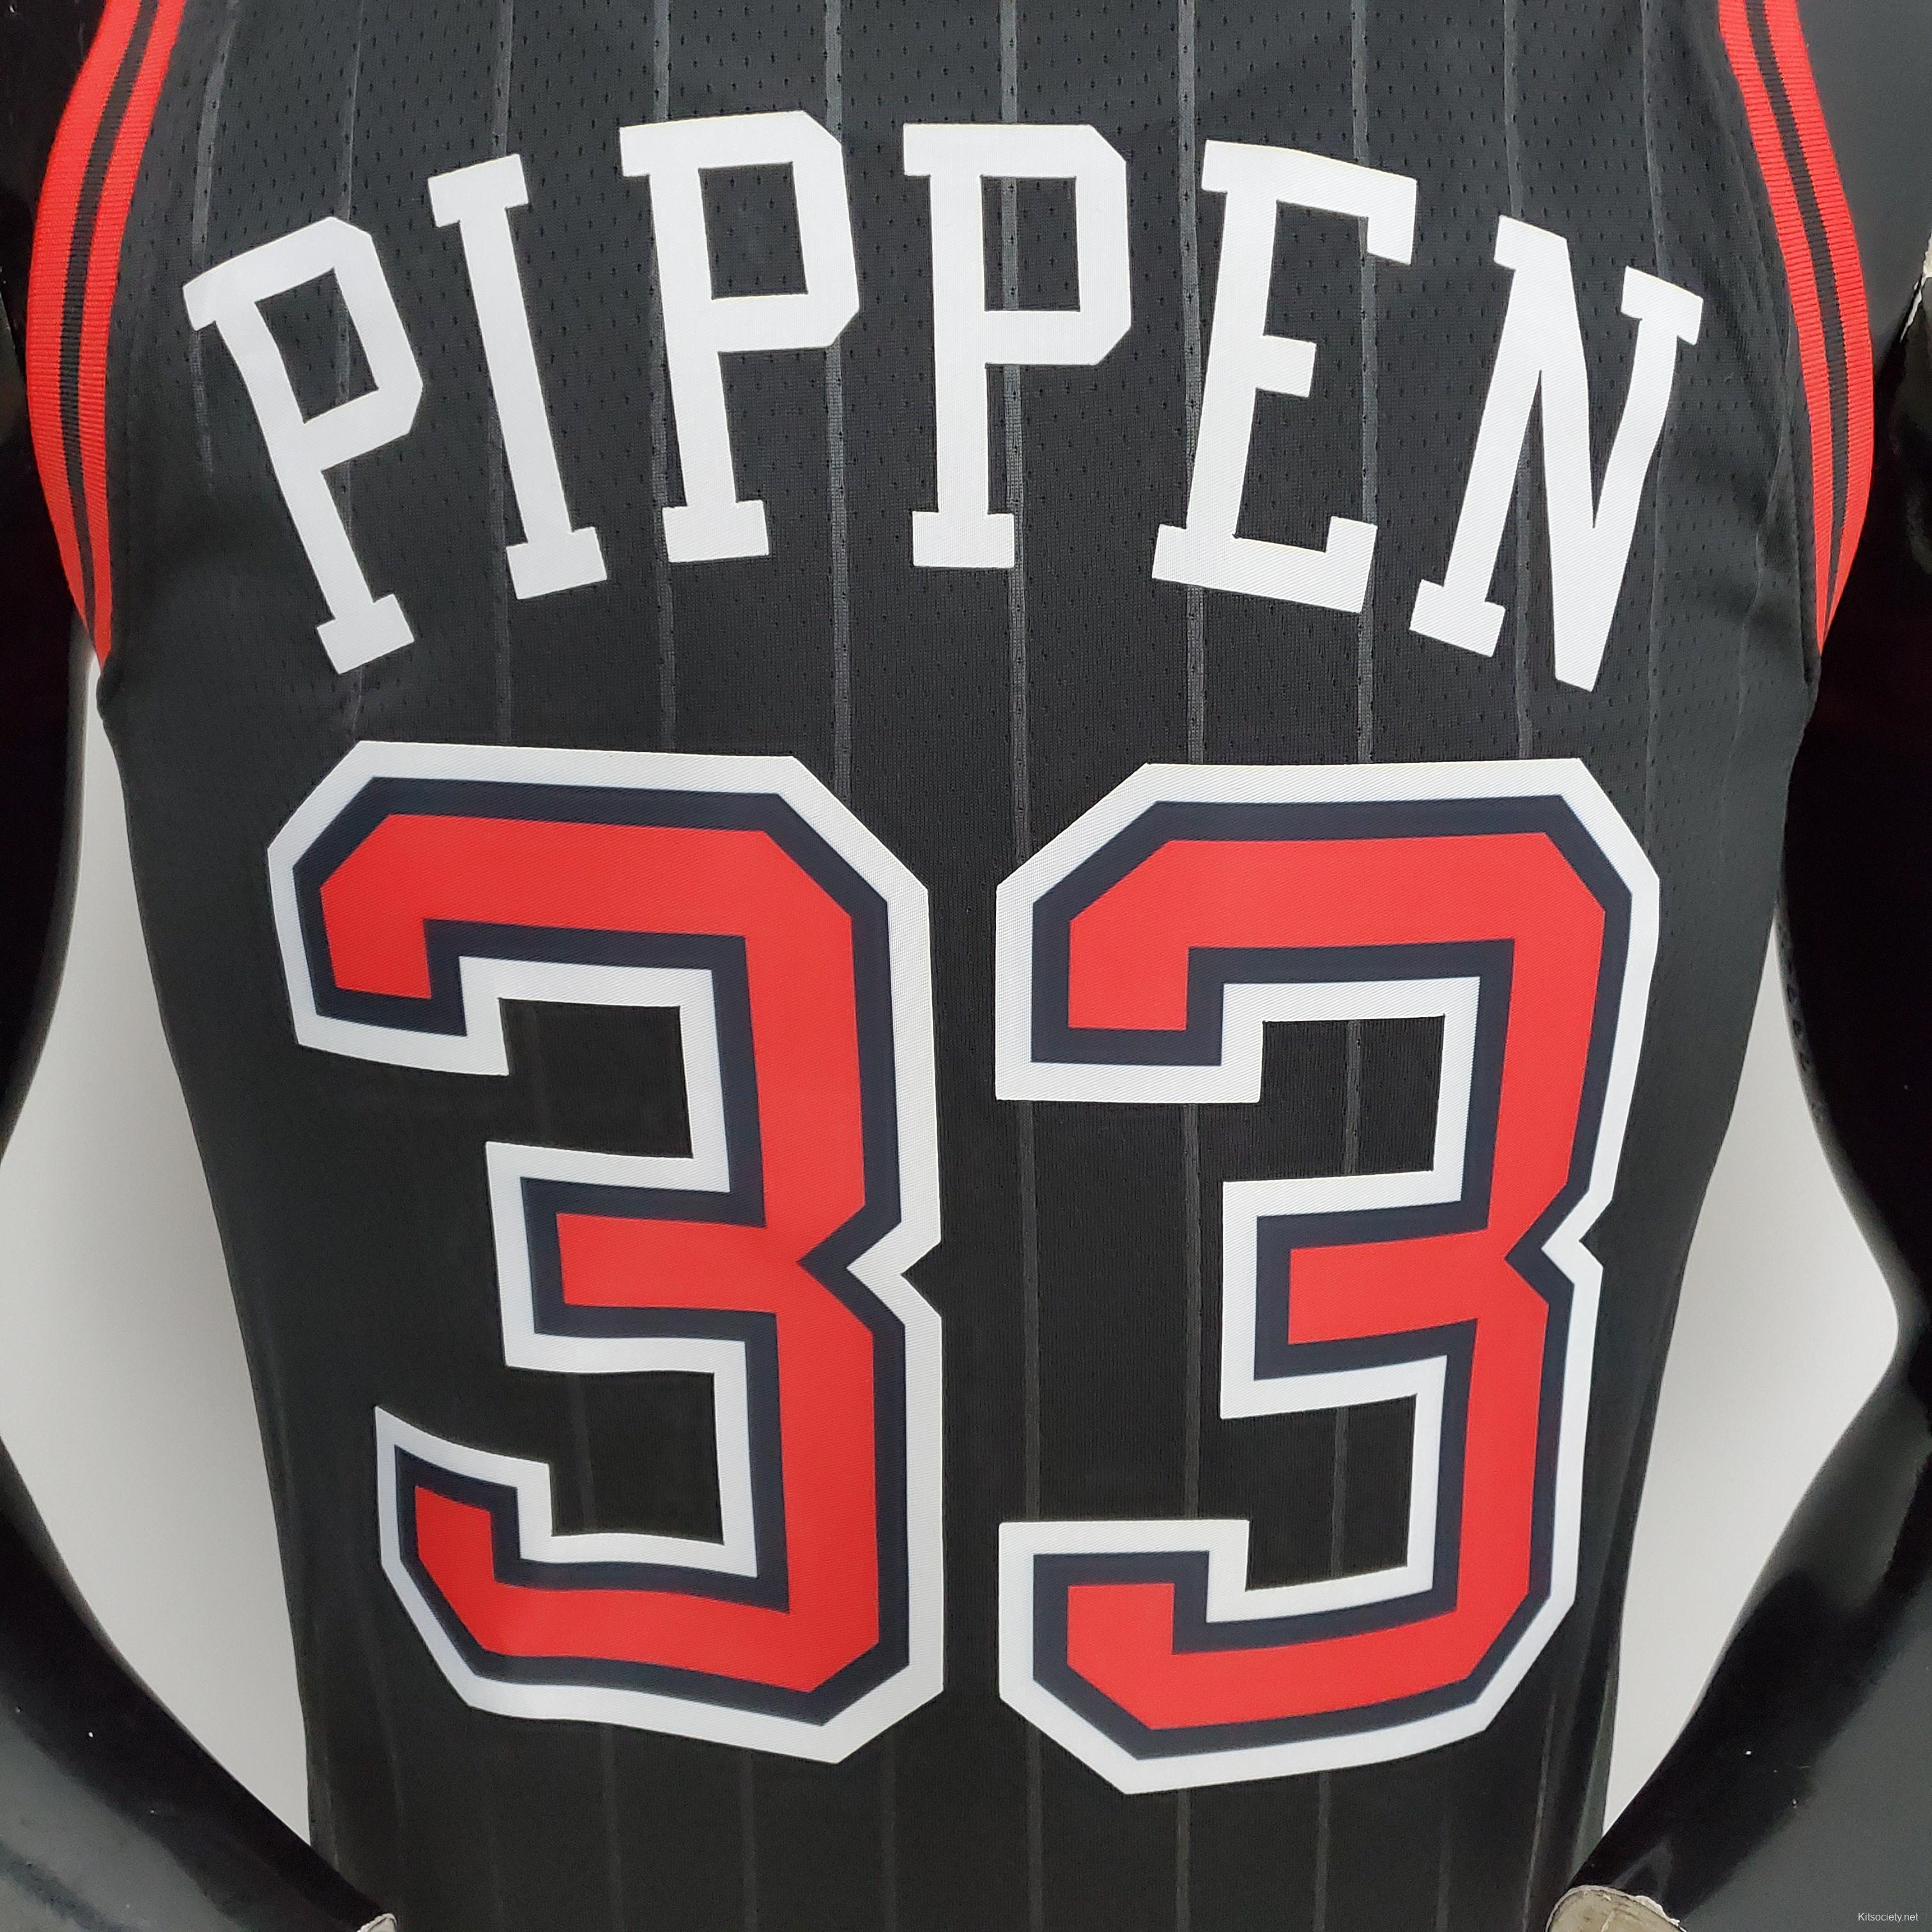 33 pippen jersey